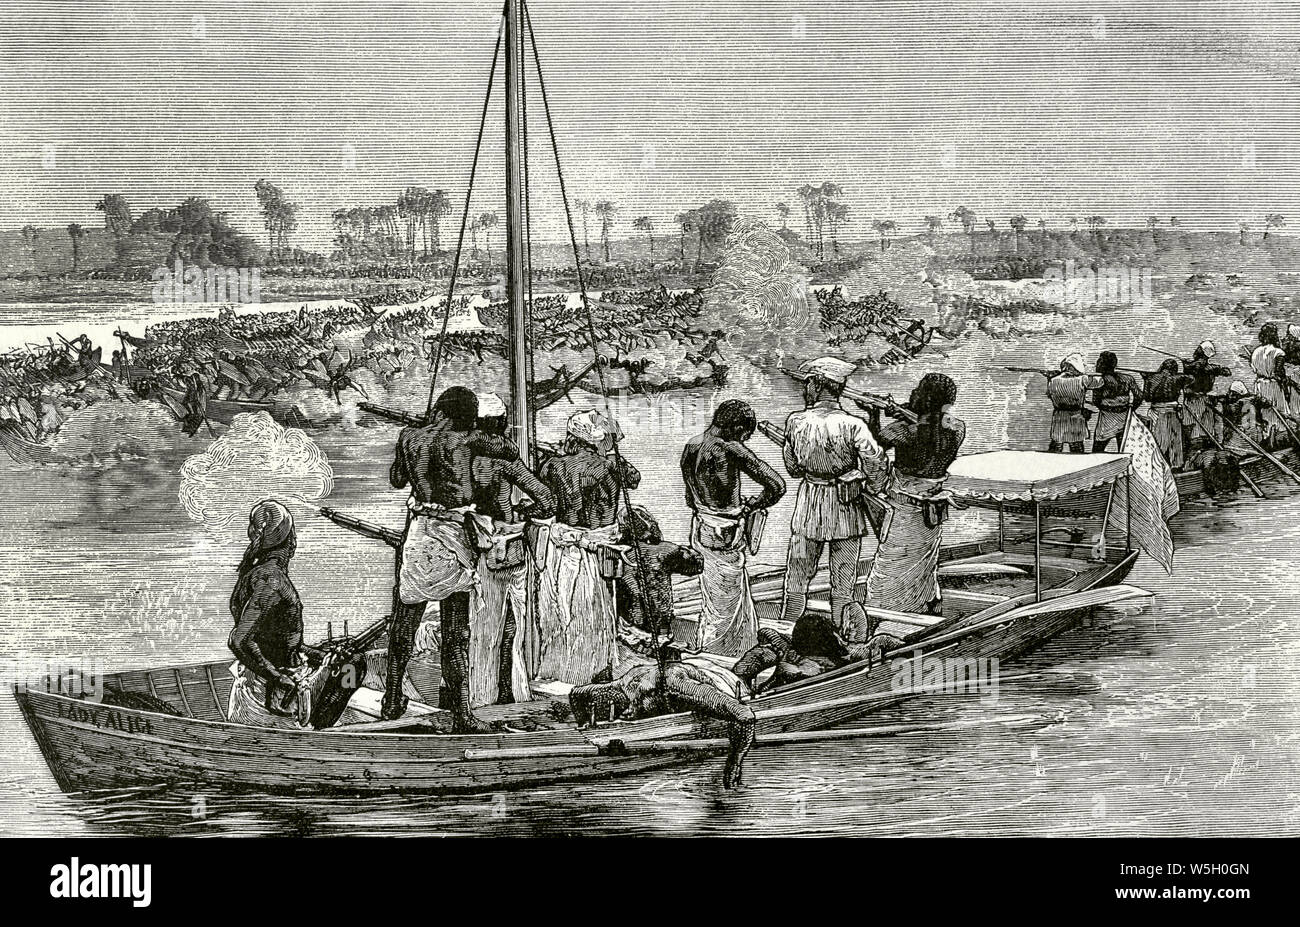 Africa. Expedition of Stanley. Attack carried out by sixty-three canoes of pirates Bangalas. In the foreground the Lady ALice repelling aggression. Africa inexplorada, el Continente Misterioso by Henry Morton Stanley, c. 1887. Stock Photo